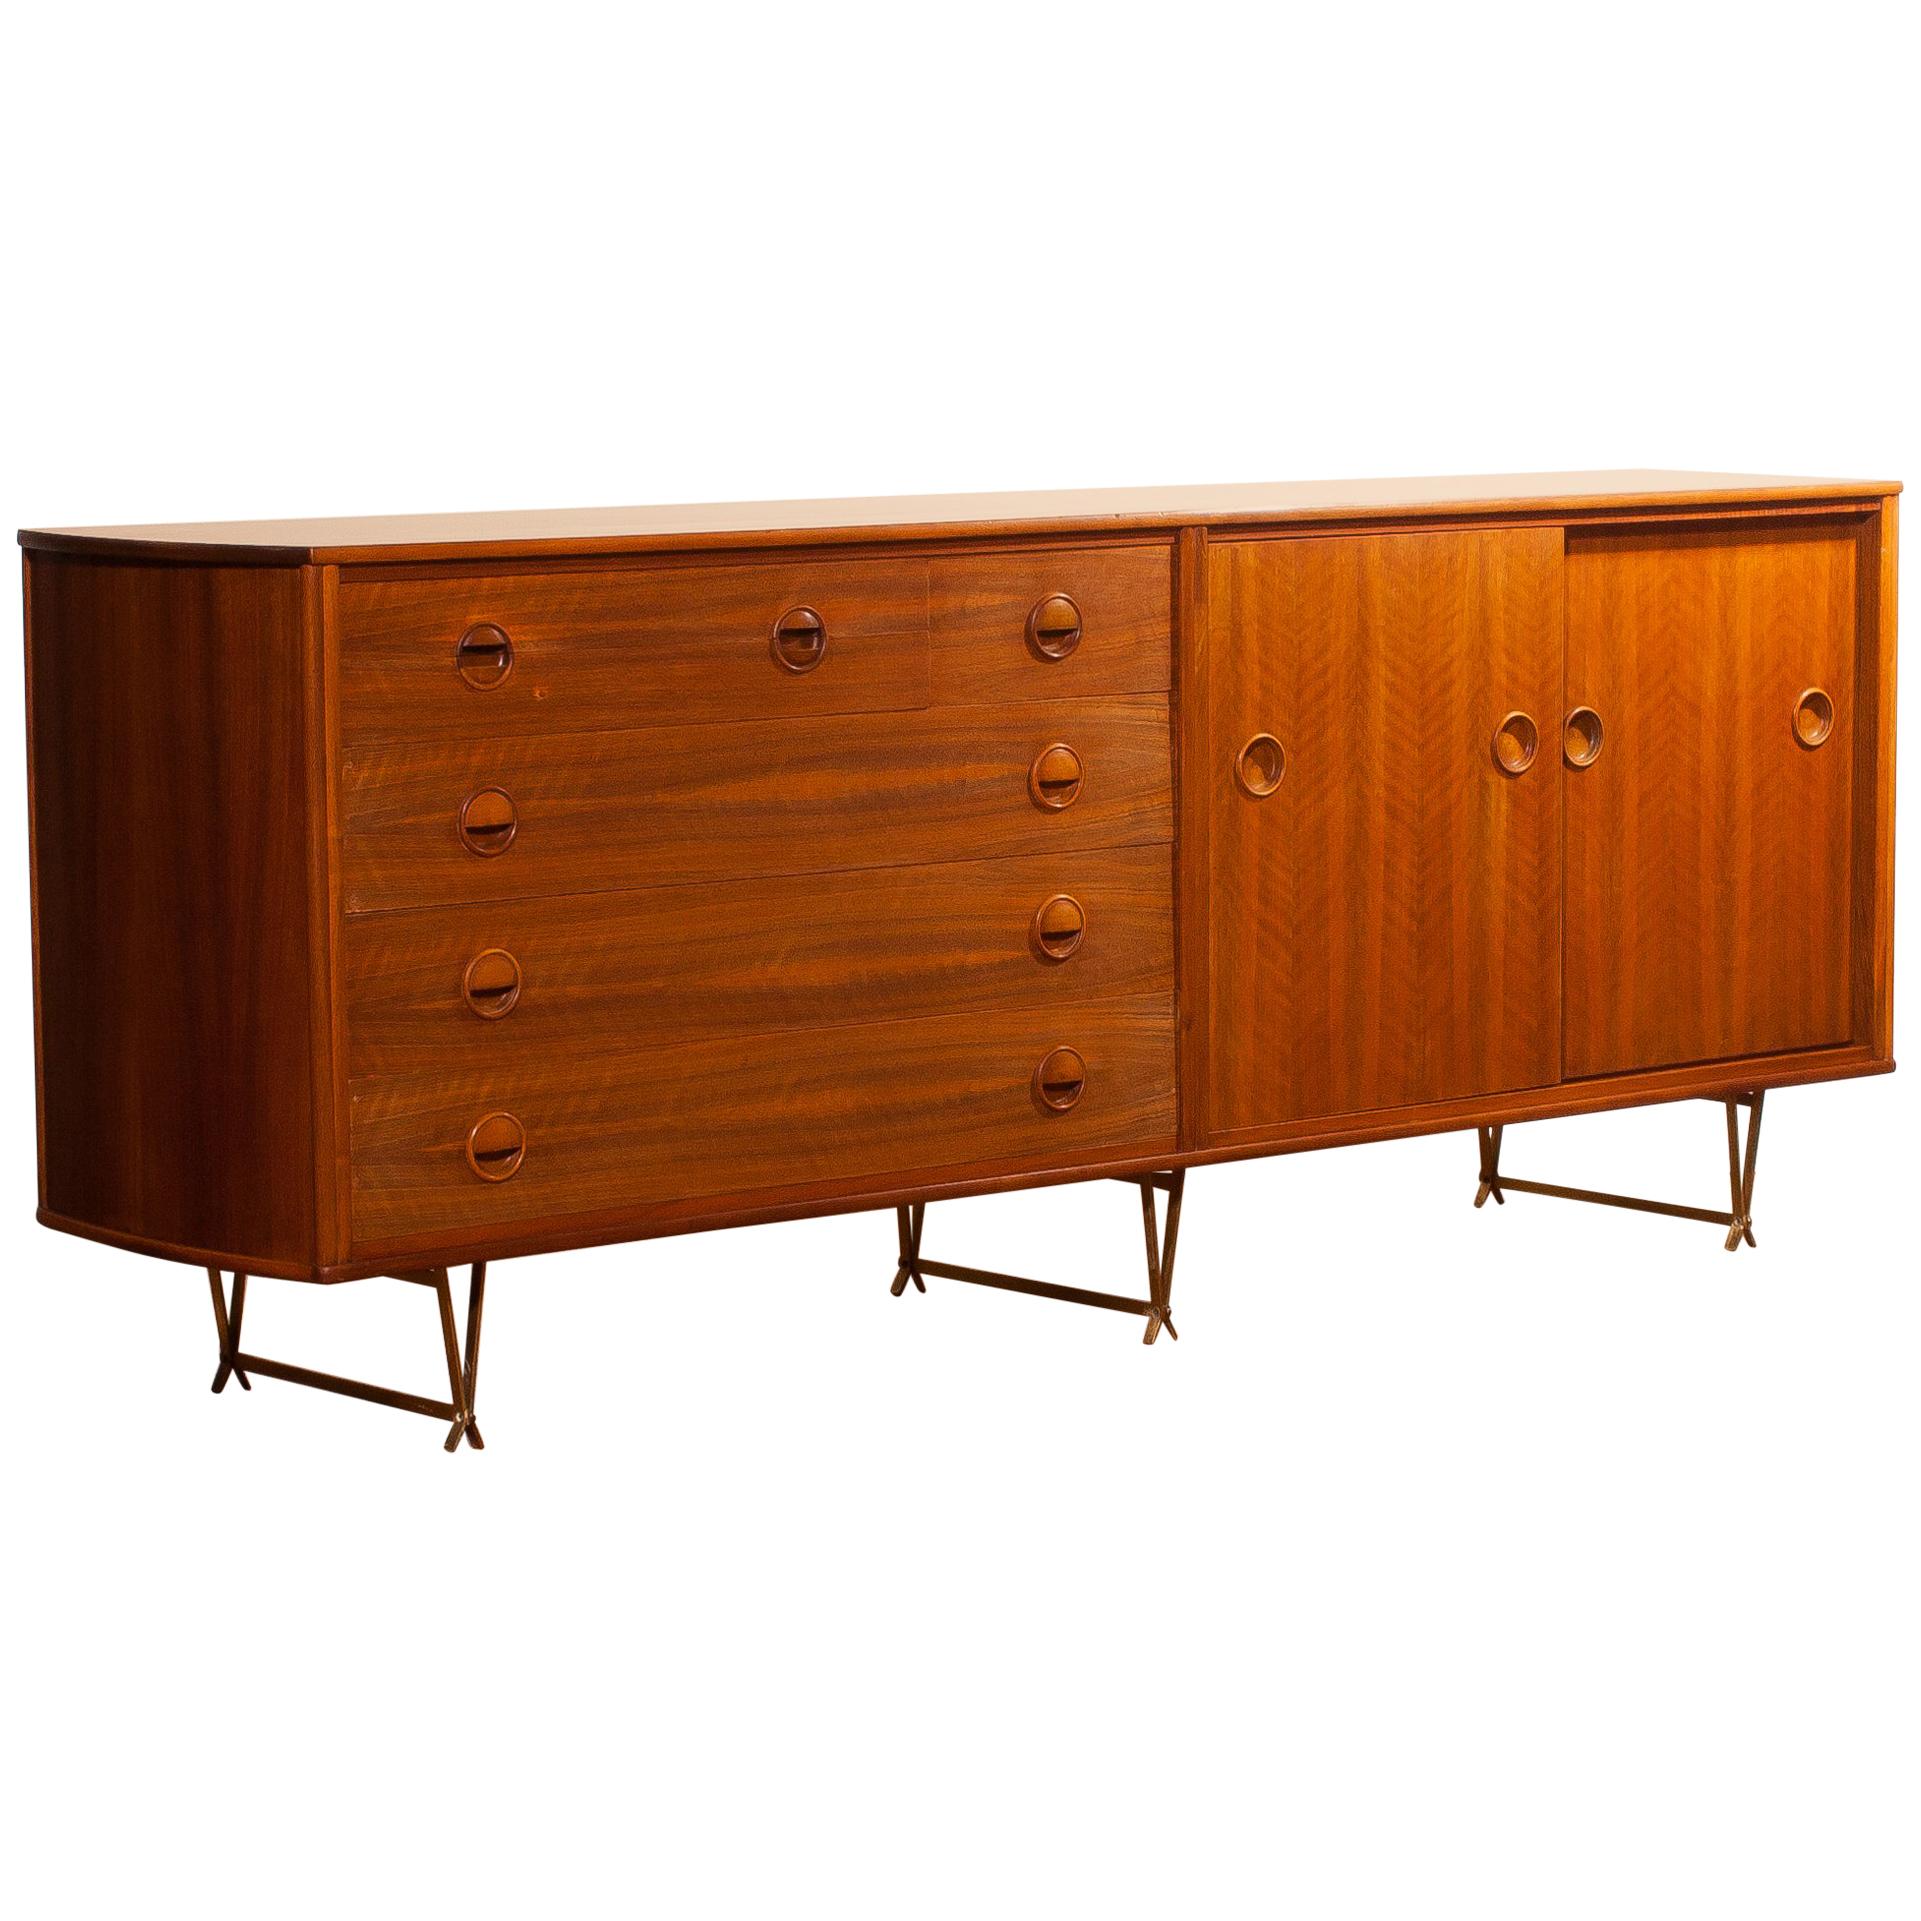 1950s, Teak Sideboard by William Watting for Fristho